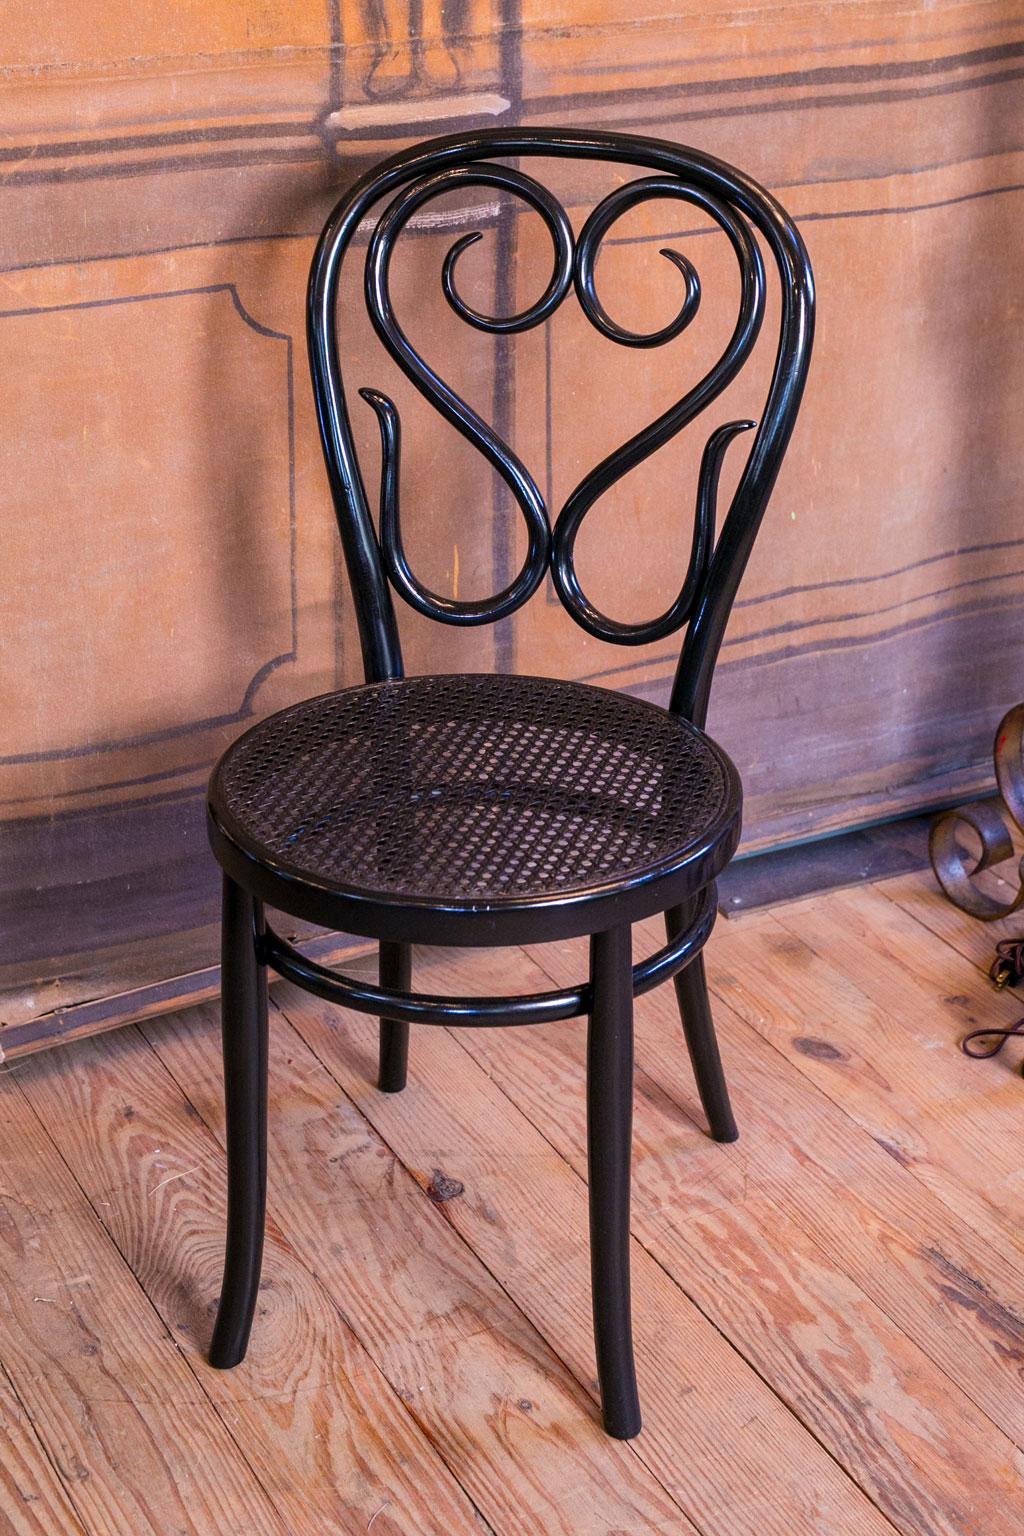 Set of five bentwood bistro chairs with cane seats. These Italian chairs are adorned in an ebonized finish and date to about the 1940s. Sold together as a set of five for $1,550.